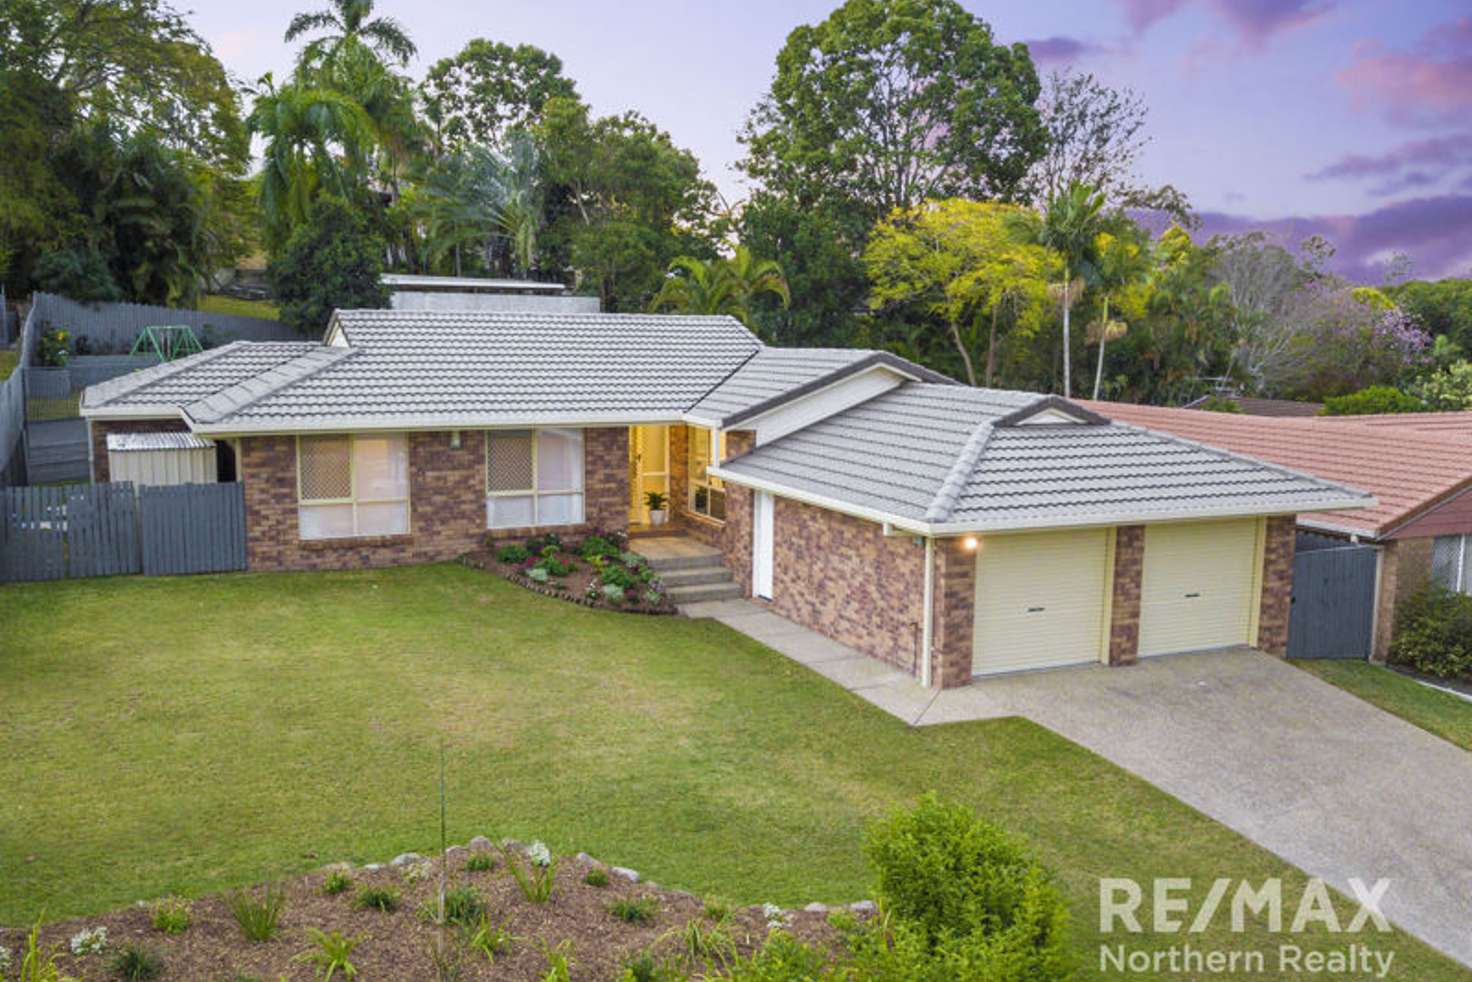 Main view of Homely house listing, 103 View Cres, Arana Hills QLD 4054